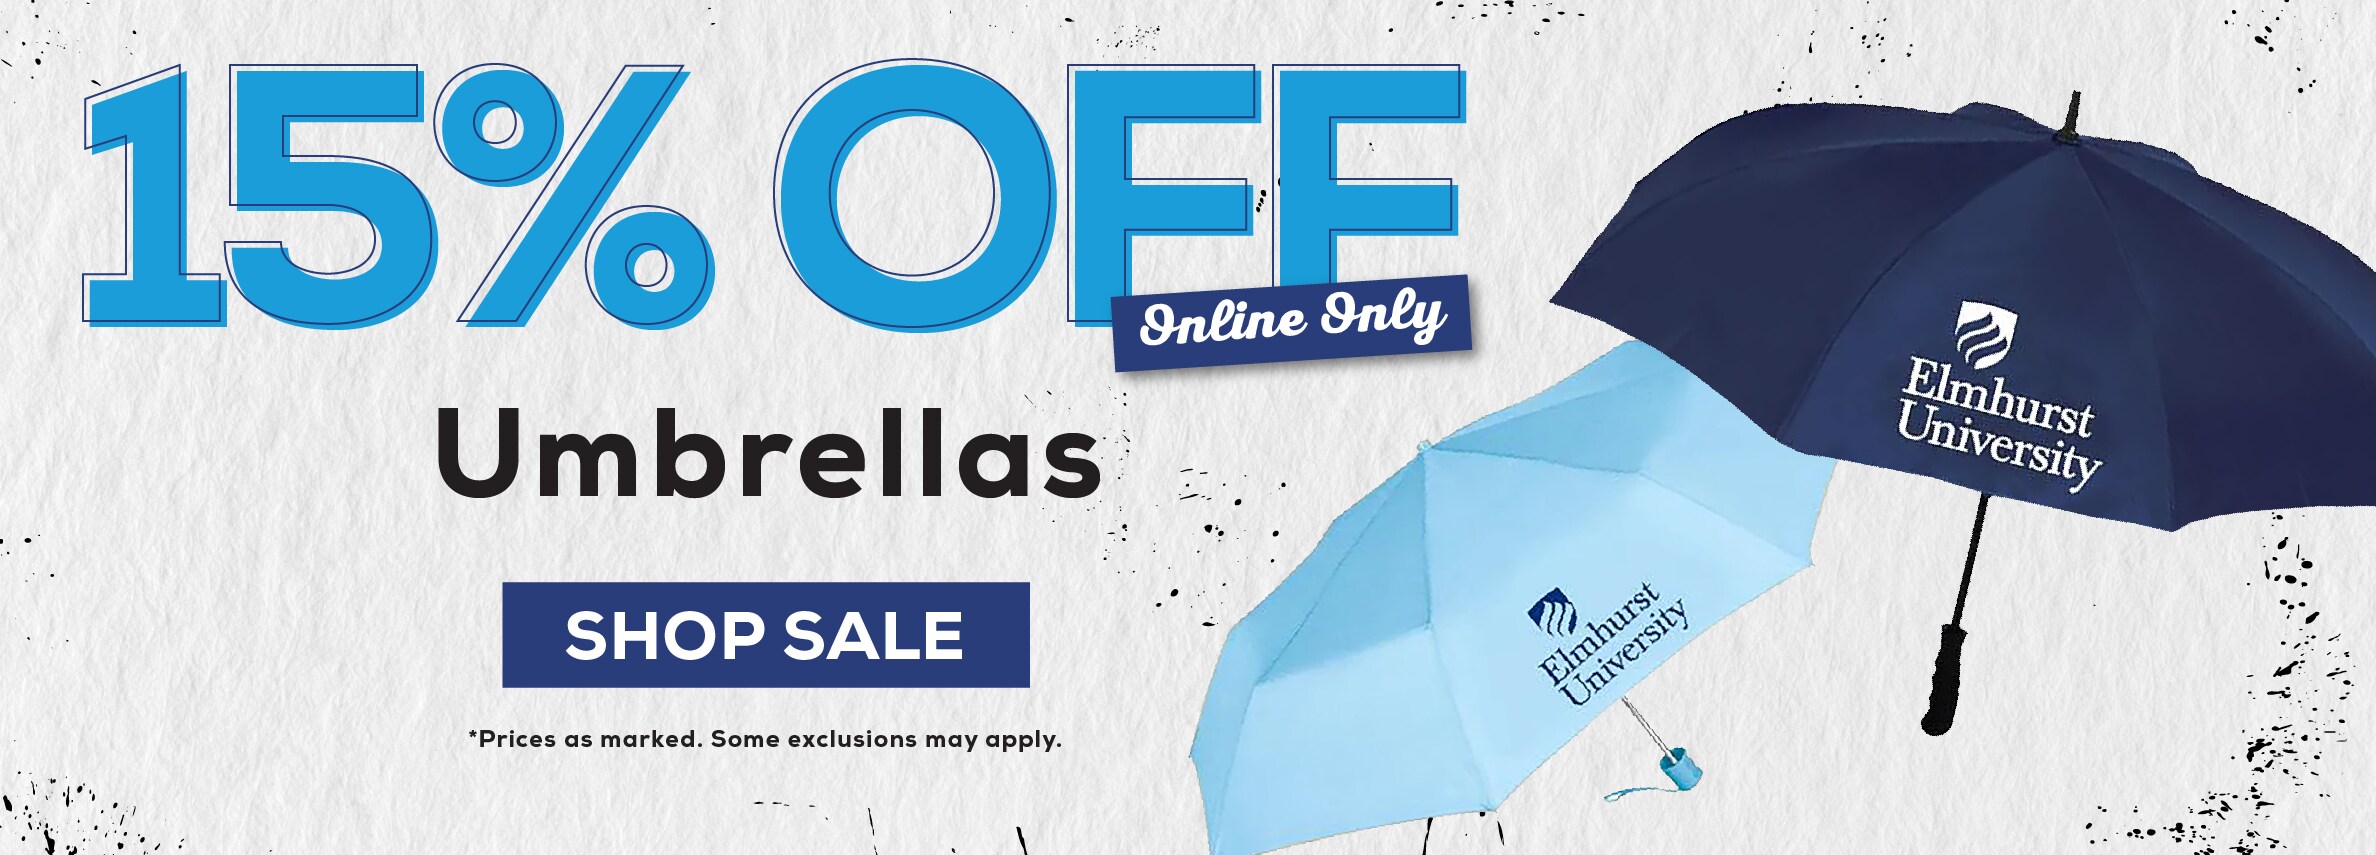 15% OFF Online Only Umbrellas SHOP SALE *Prices as marked. Some exclusions may apply.